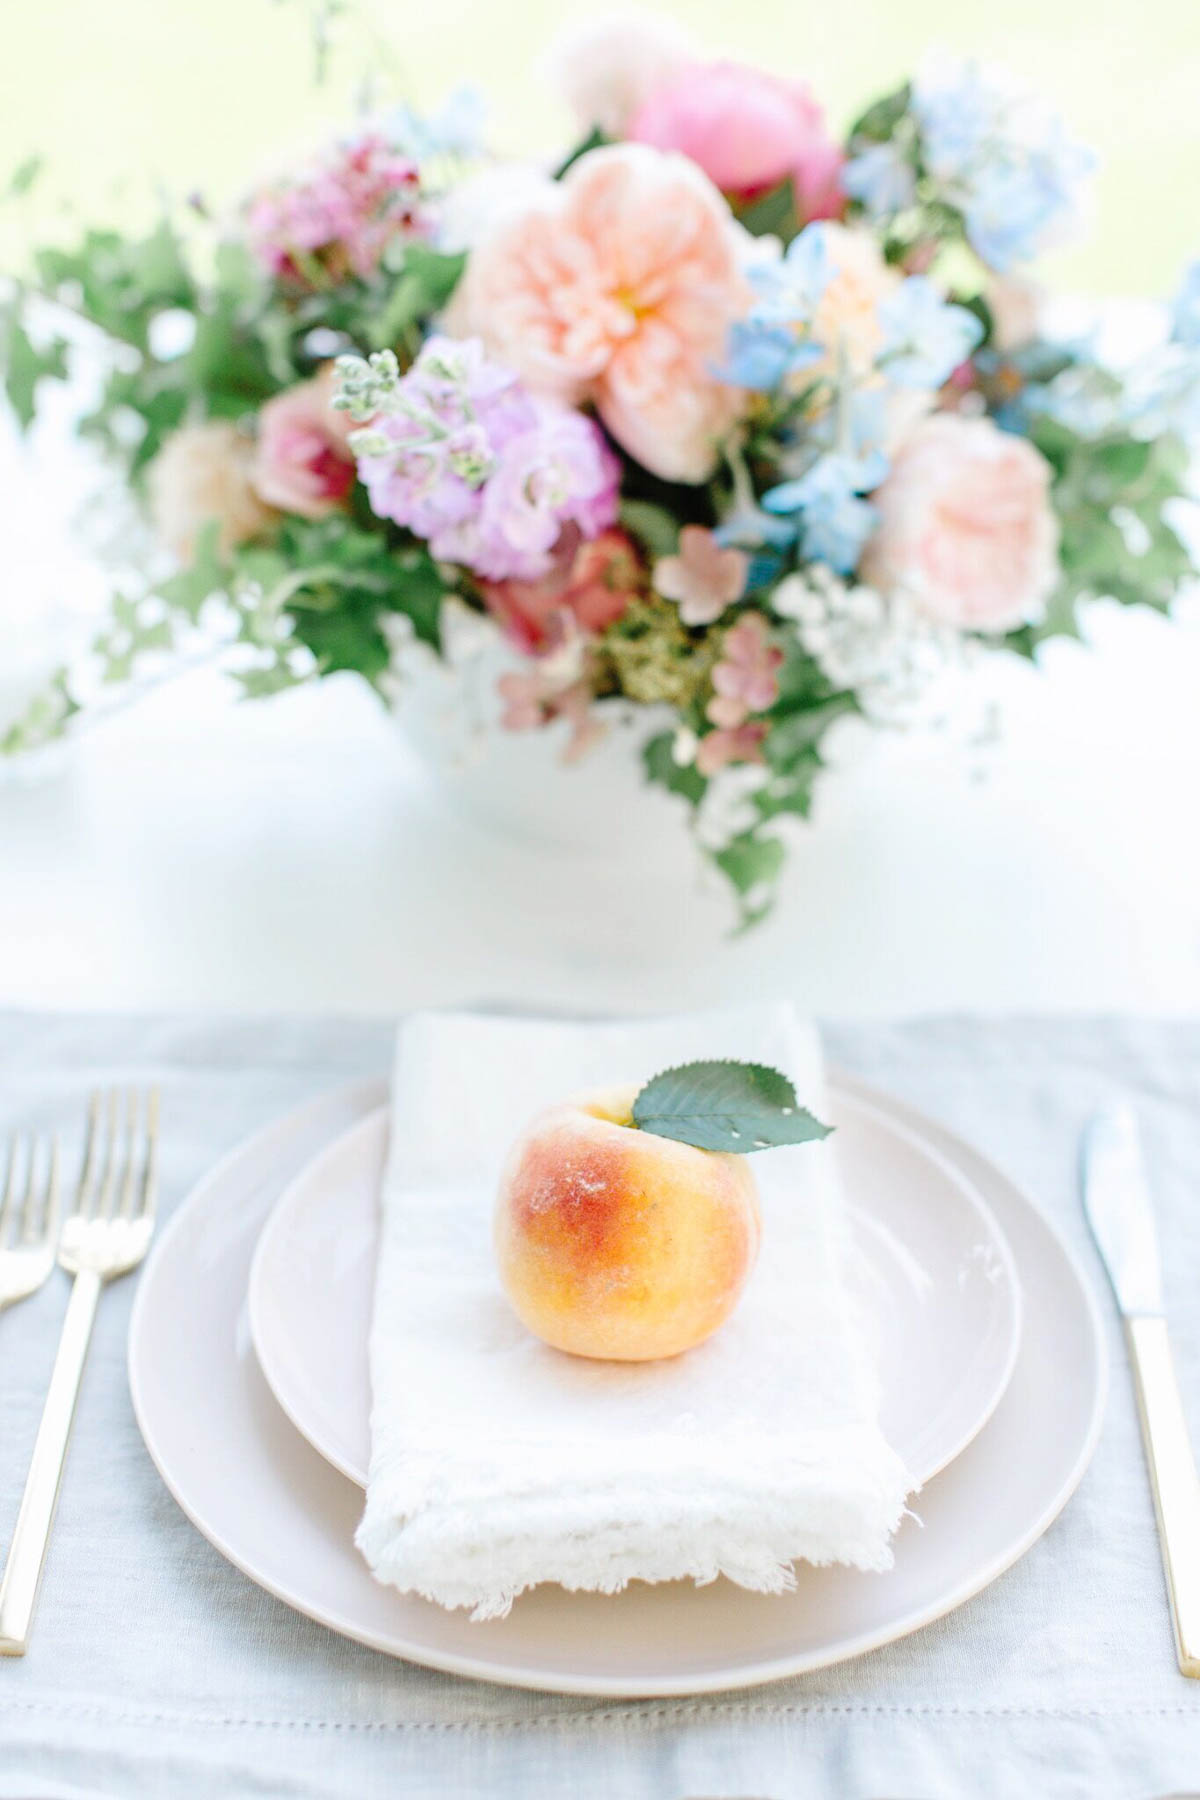 a peach on a plate with flowers in the background